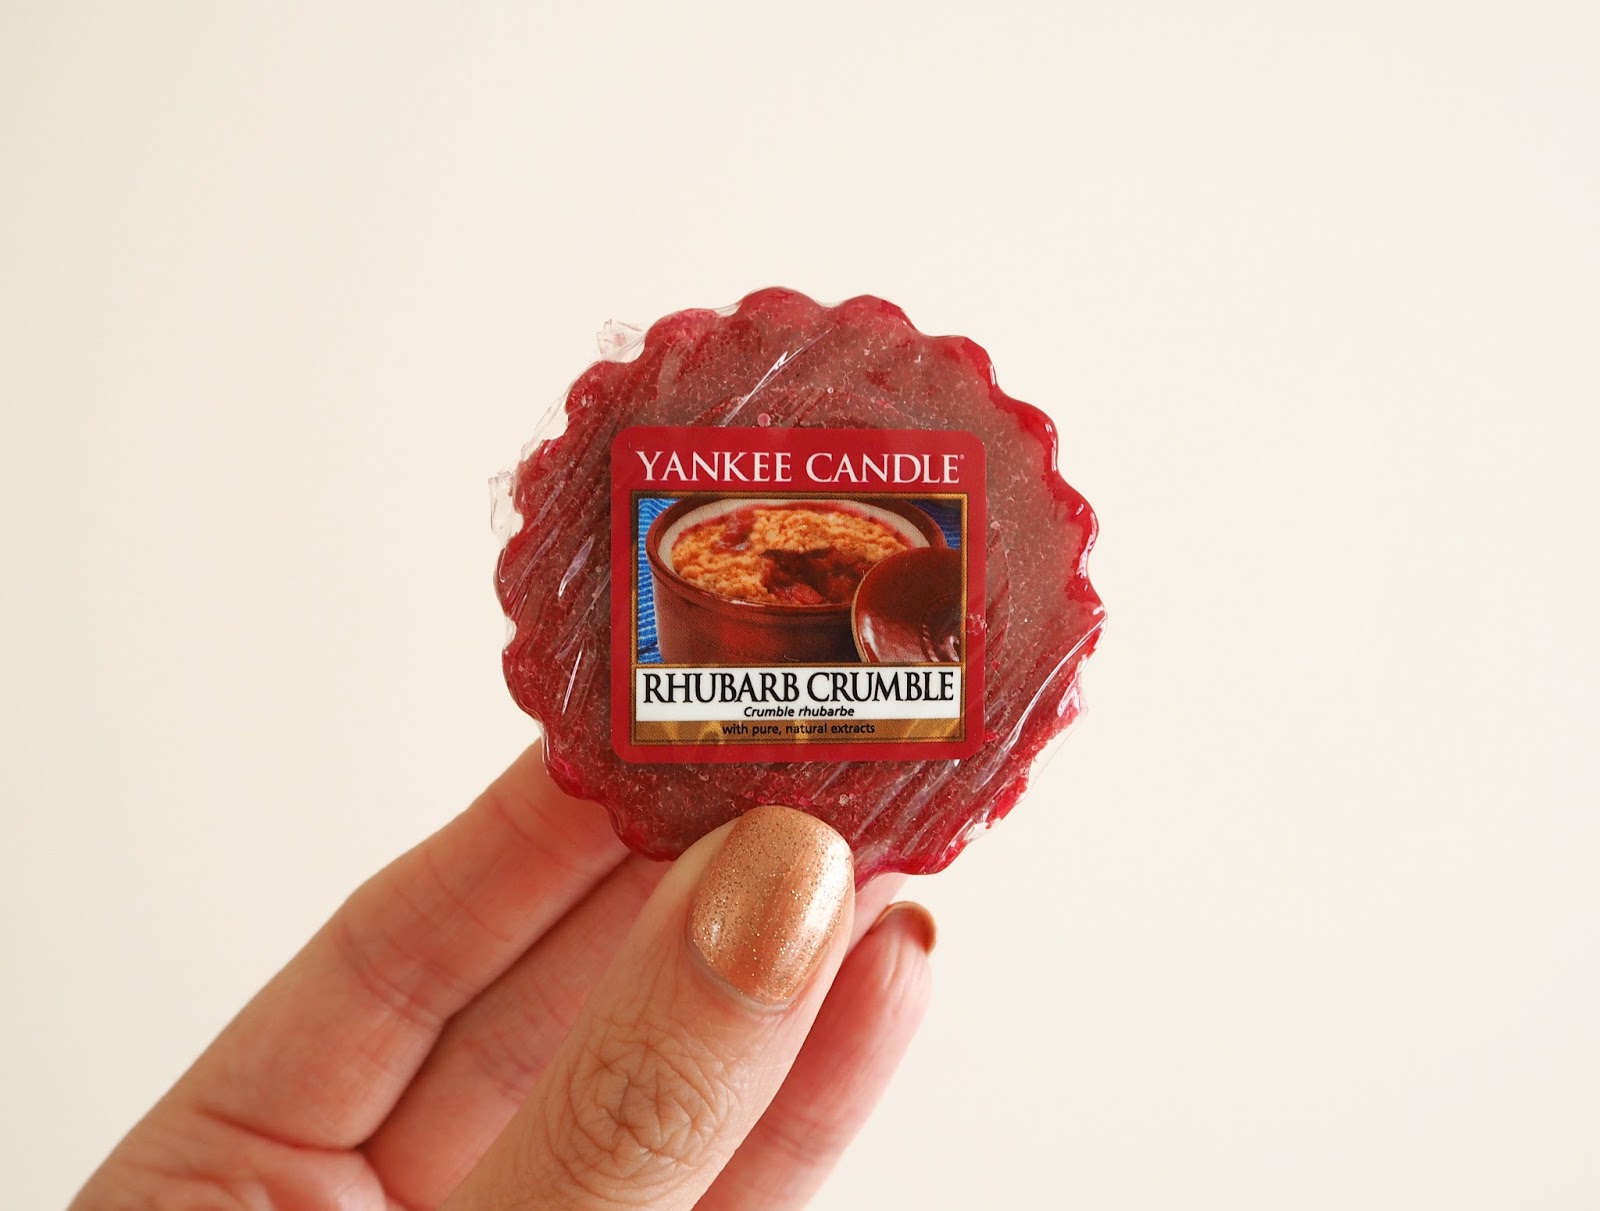 Yankee Candle, Yankee Candle Harvest Time, Candle Review, Fragrance Review, Melt Review, Yankee Candle Melts, Autumn Candles, Blogger Review, UK Blogger